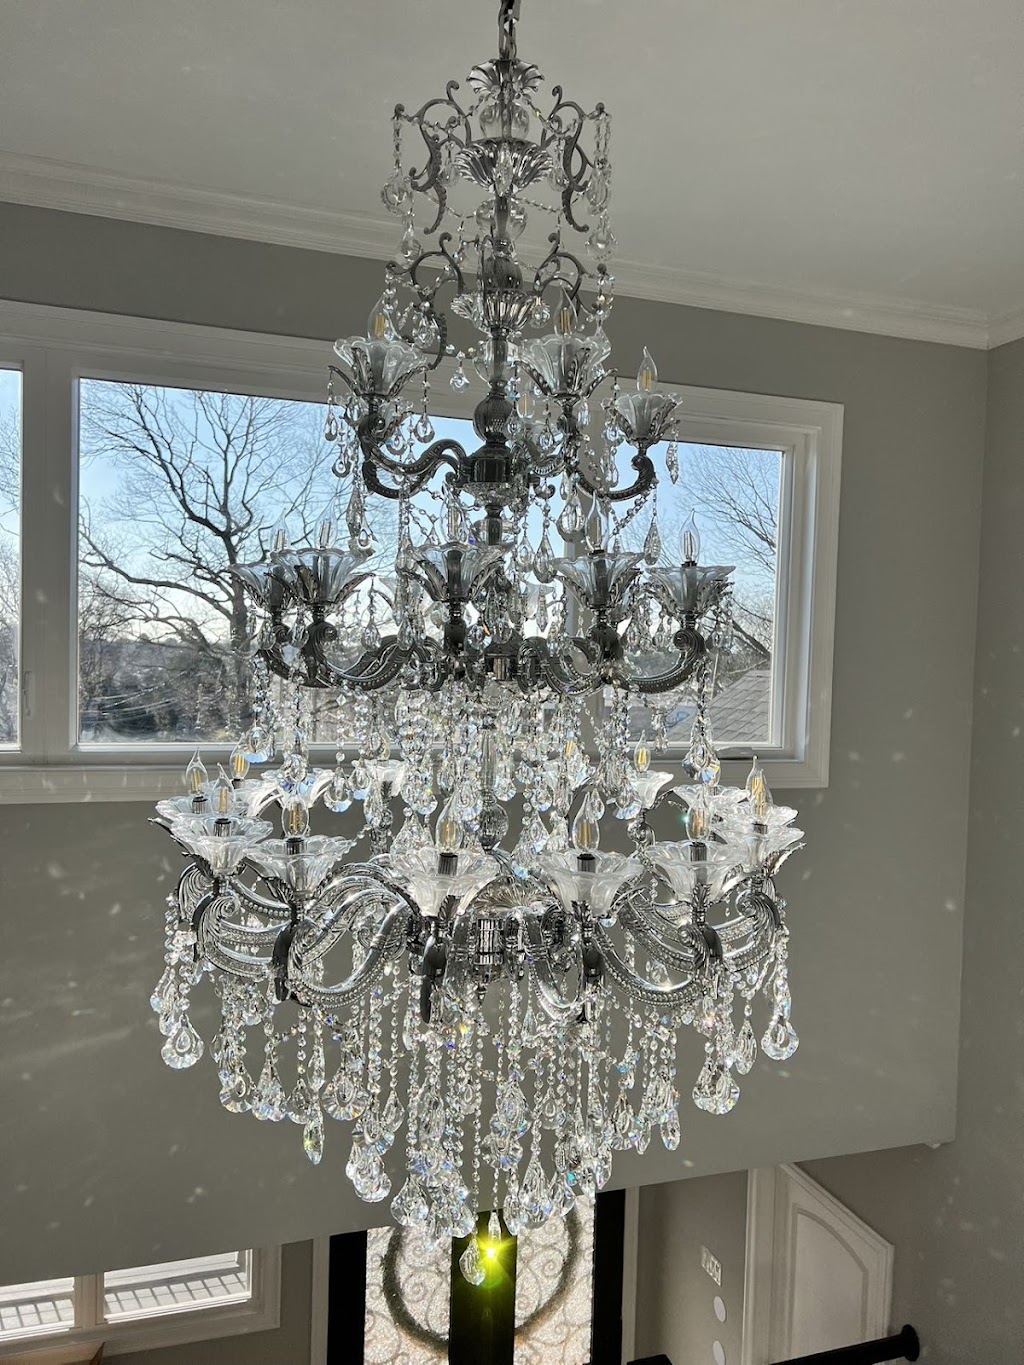 Exceptional Lighting | 435 Old Country Rd, Westbury, NY 11590 | Phone: (516) 280-8385